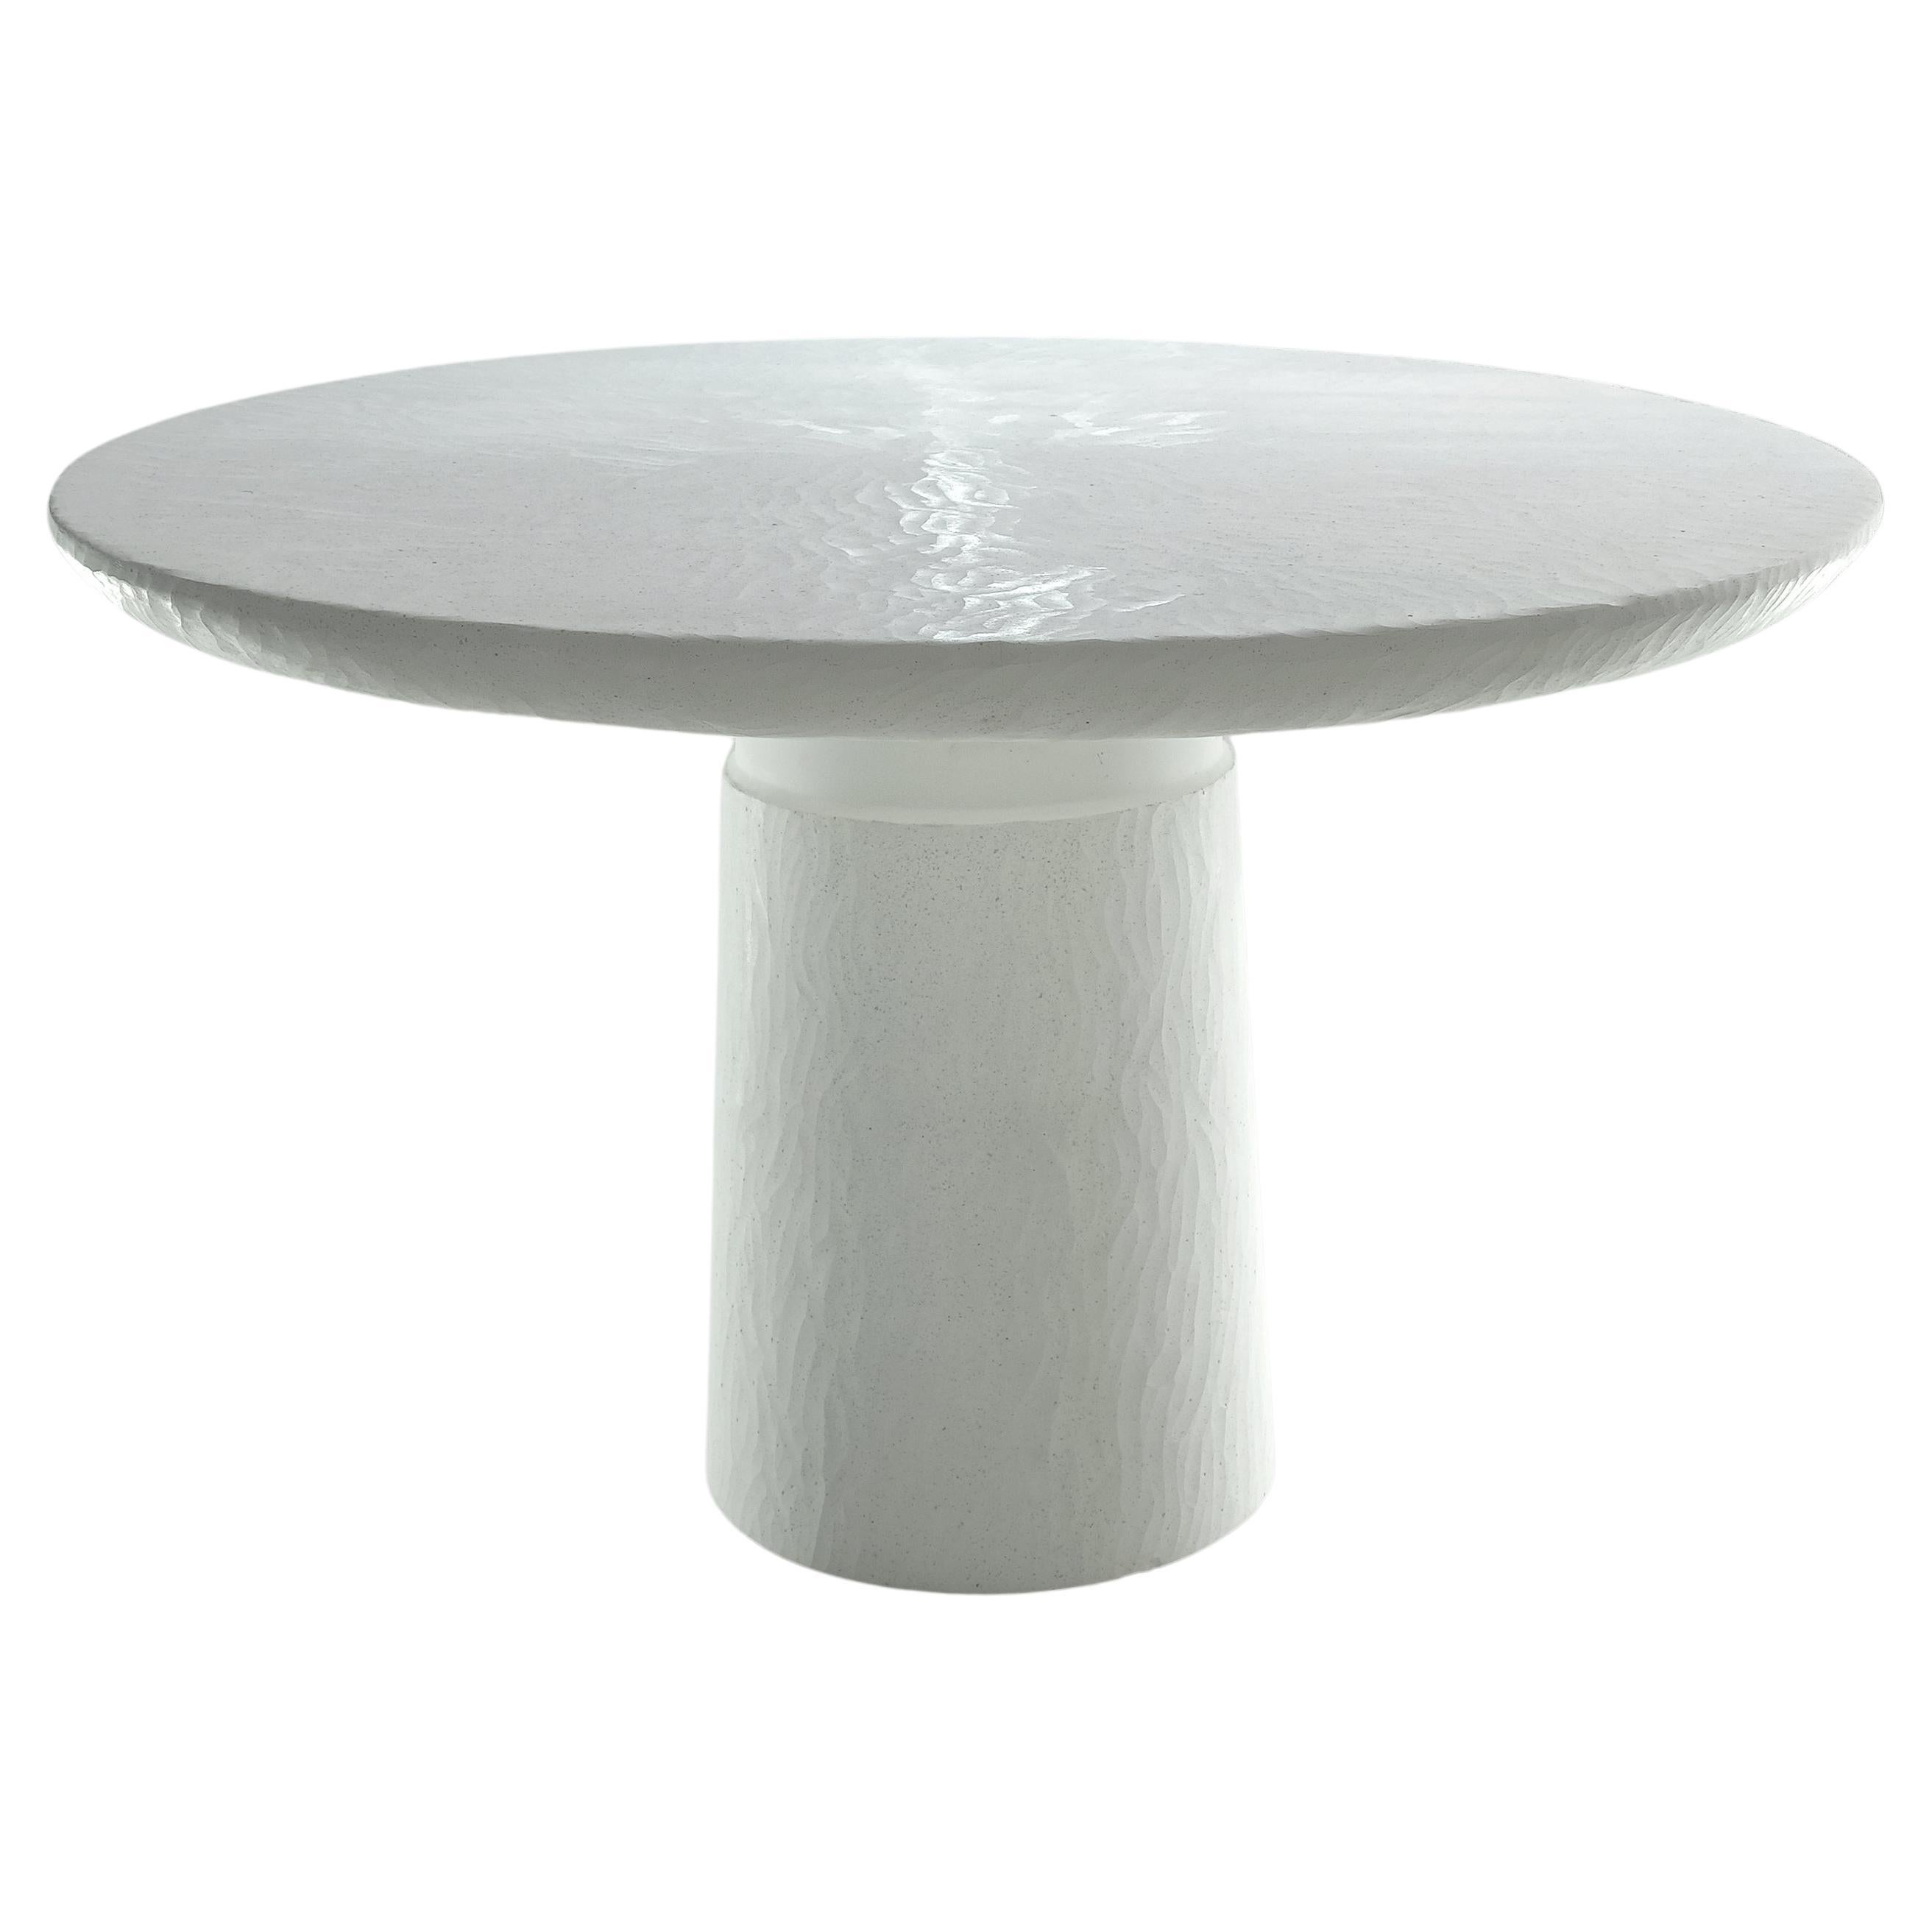 Organic Modern Table "Poise Sculpted" in white cast stone by Alentes Atelier For Sale